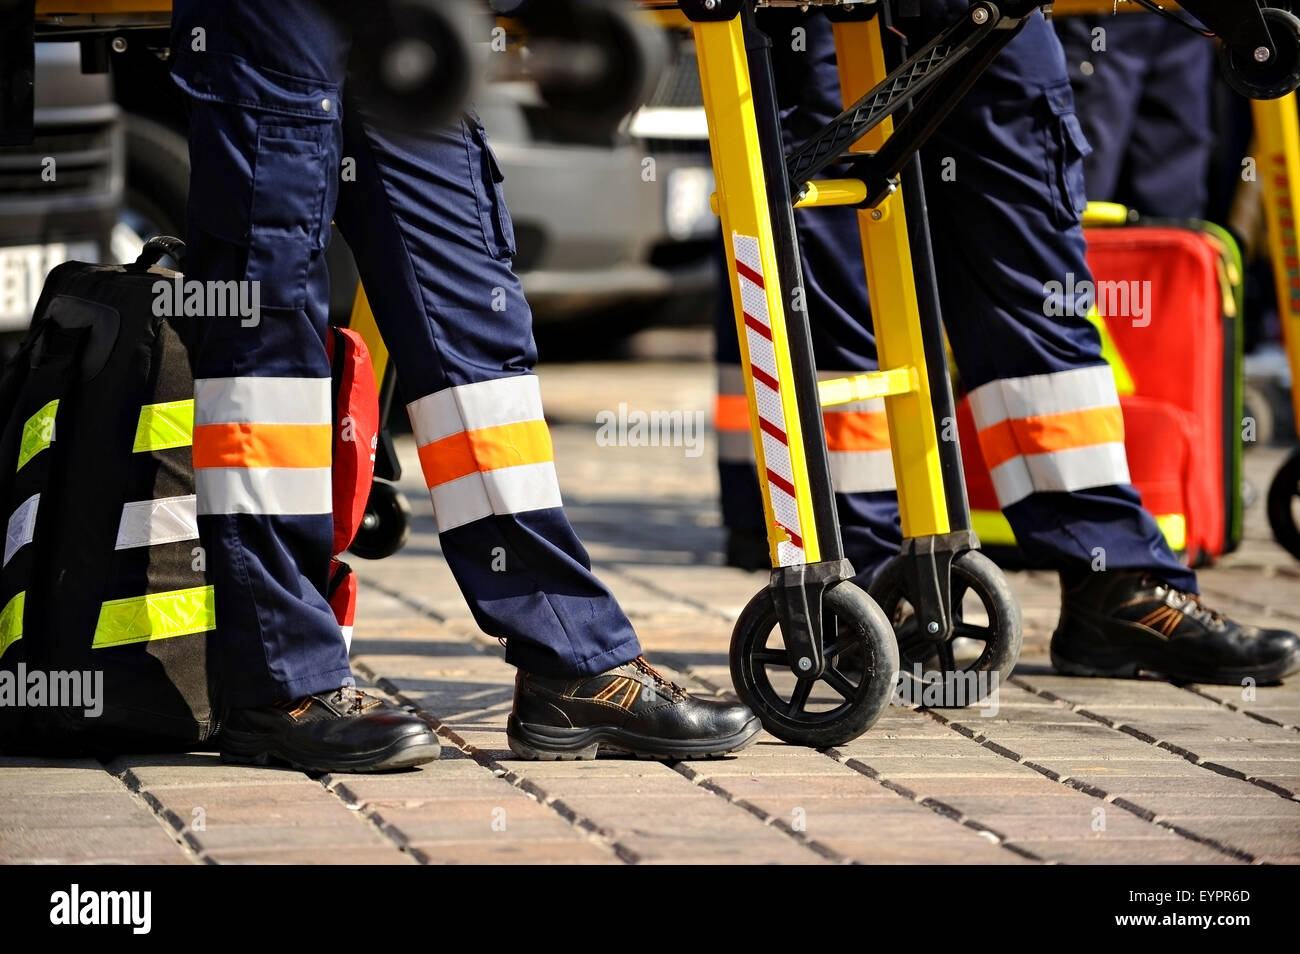 Ambulance personnel feet are seen next to emergency equipment Stock Photo